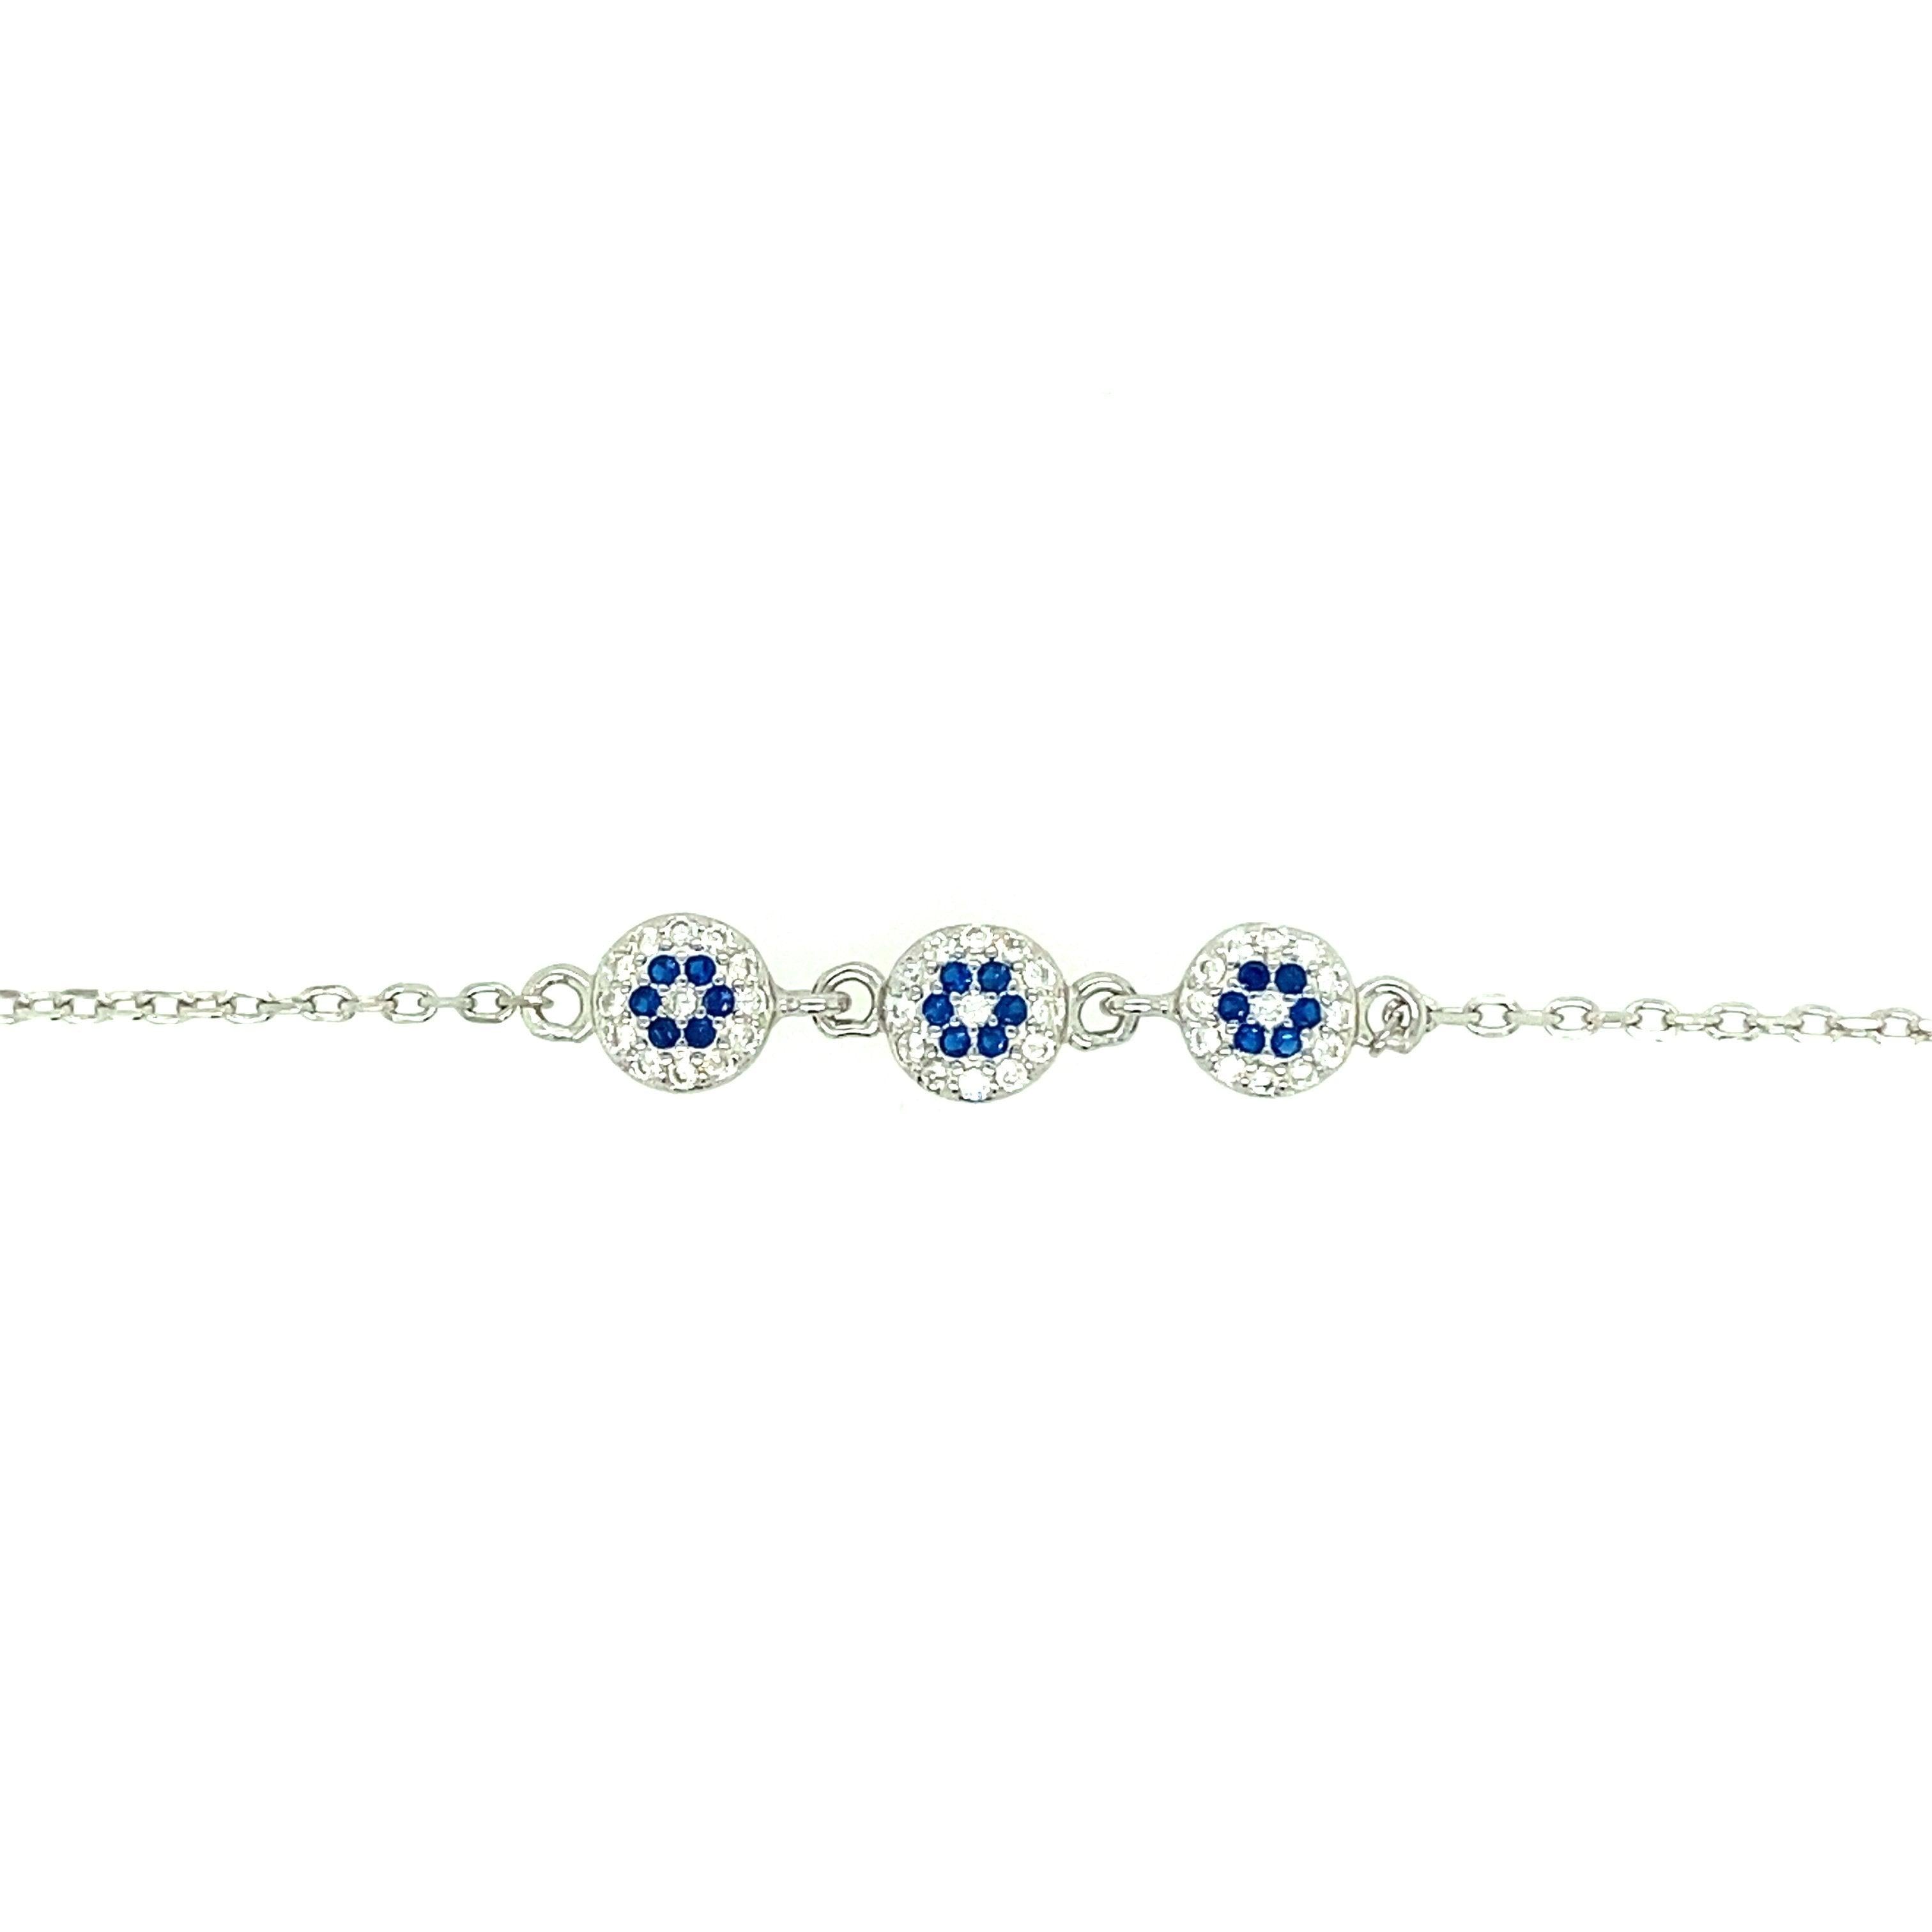 Asfour-Crystal-accessories-Bracelet-b1633-b-925-Sterling-Silver